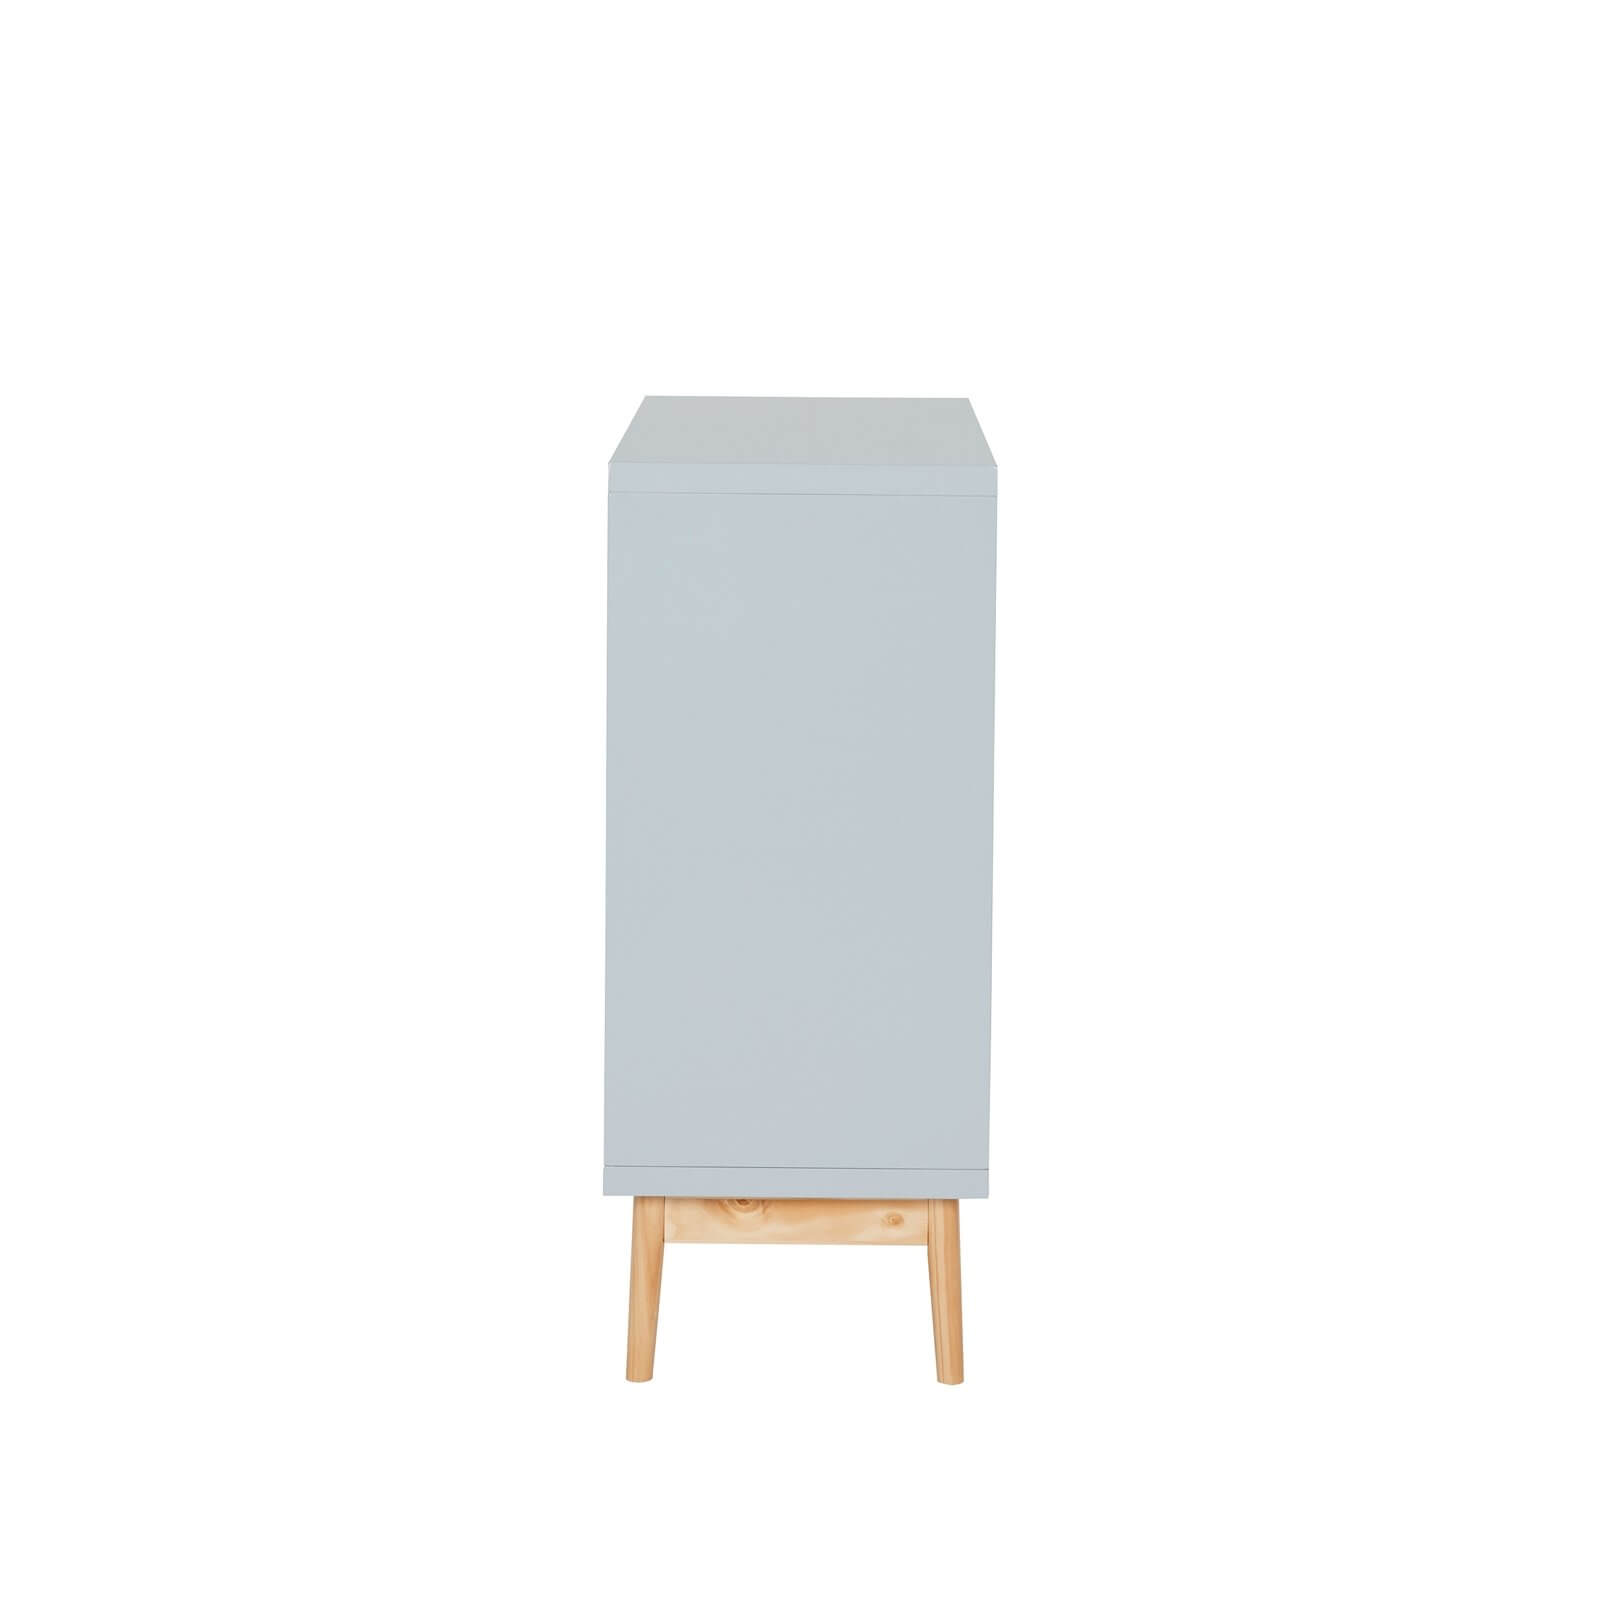 2x2 Cube Storage Unit - Painted Grey with Wooden Legs